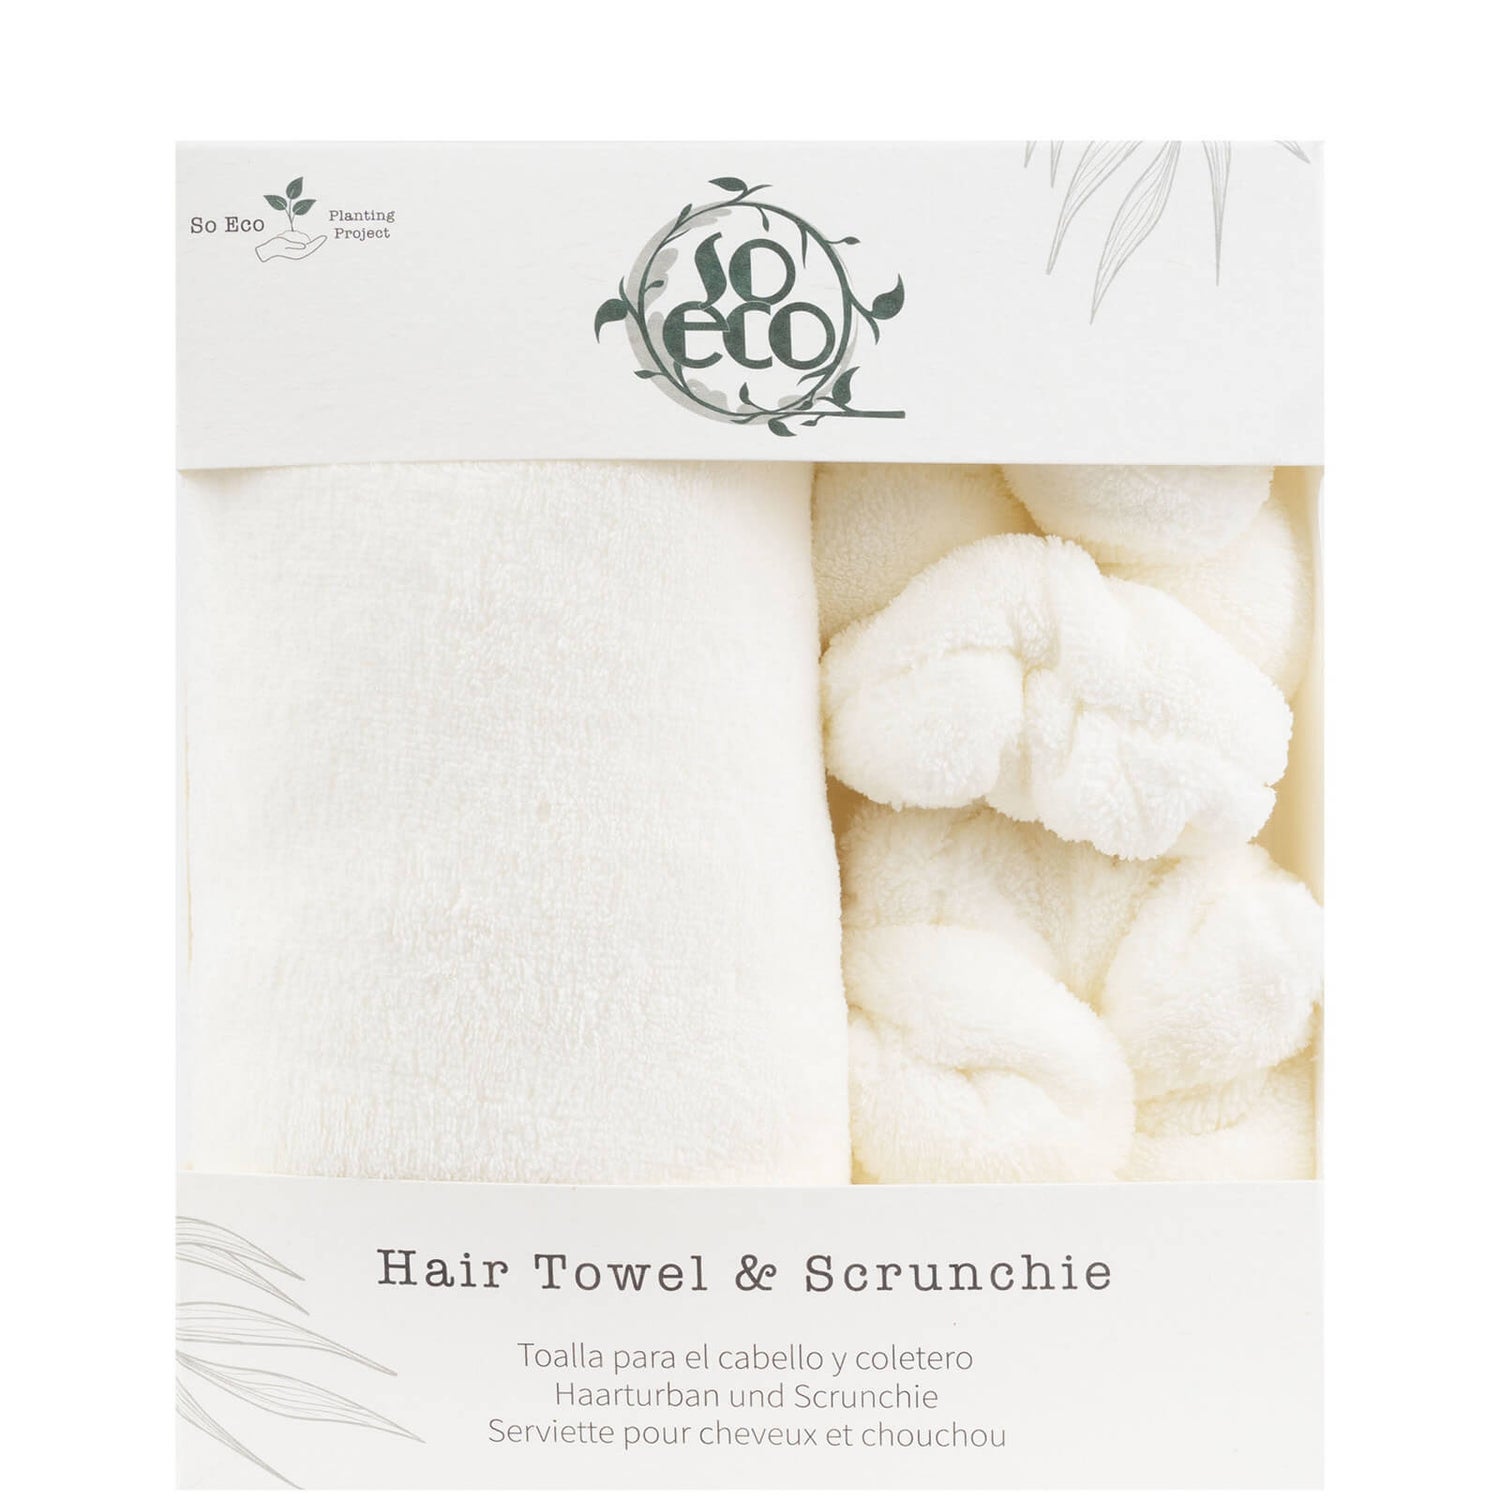 So Eco Bamboo Scrunchie and Hair Towel (Worth £14.99)